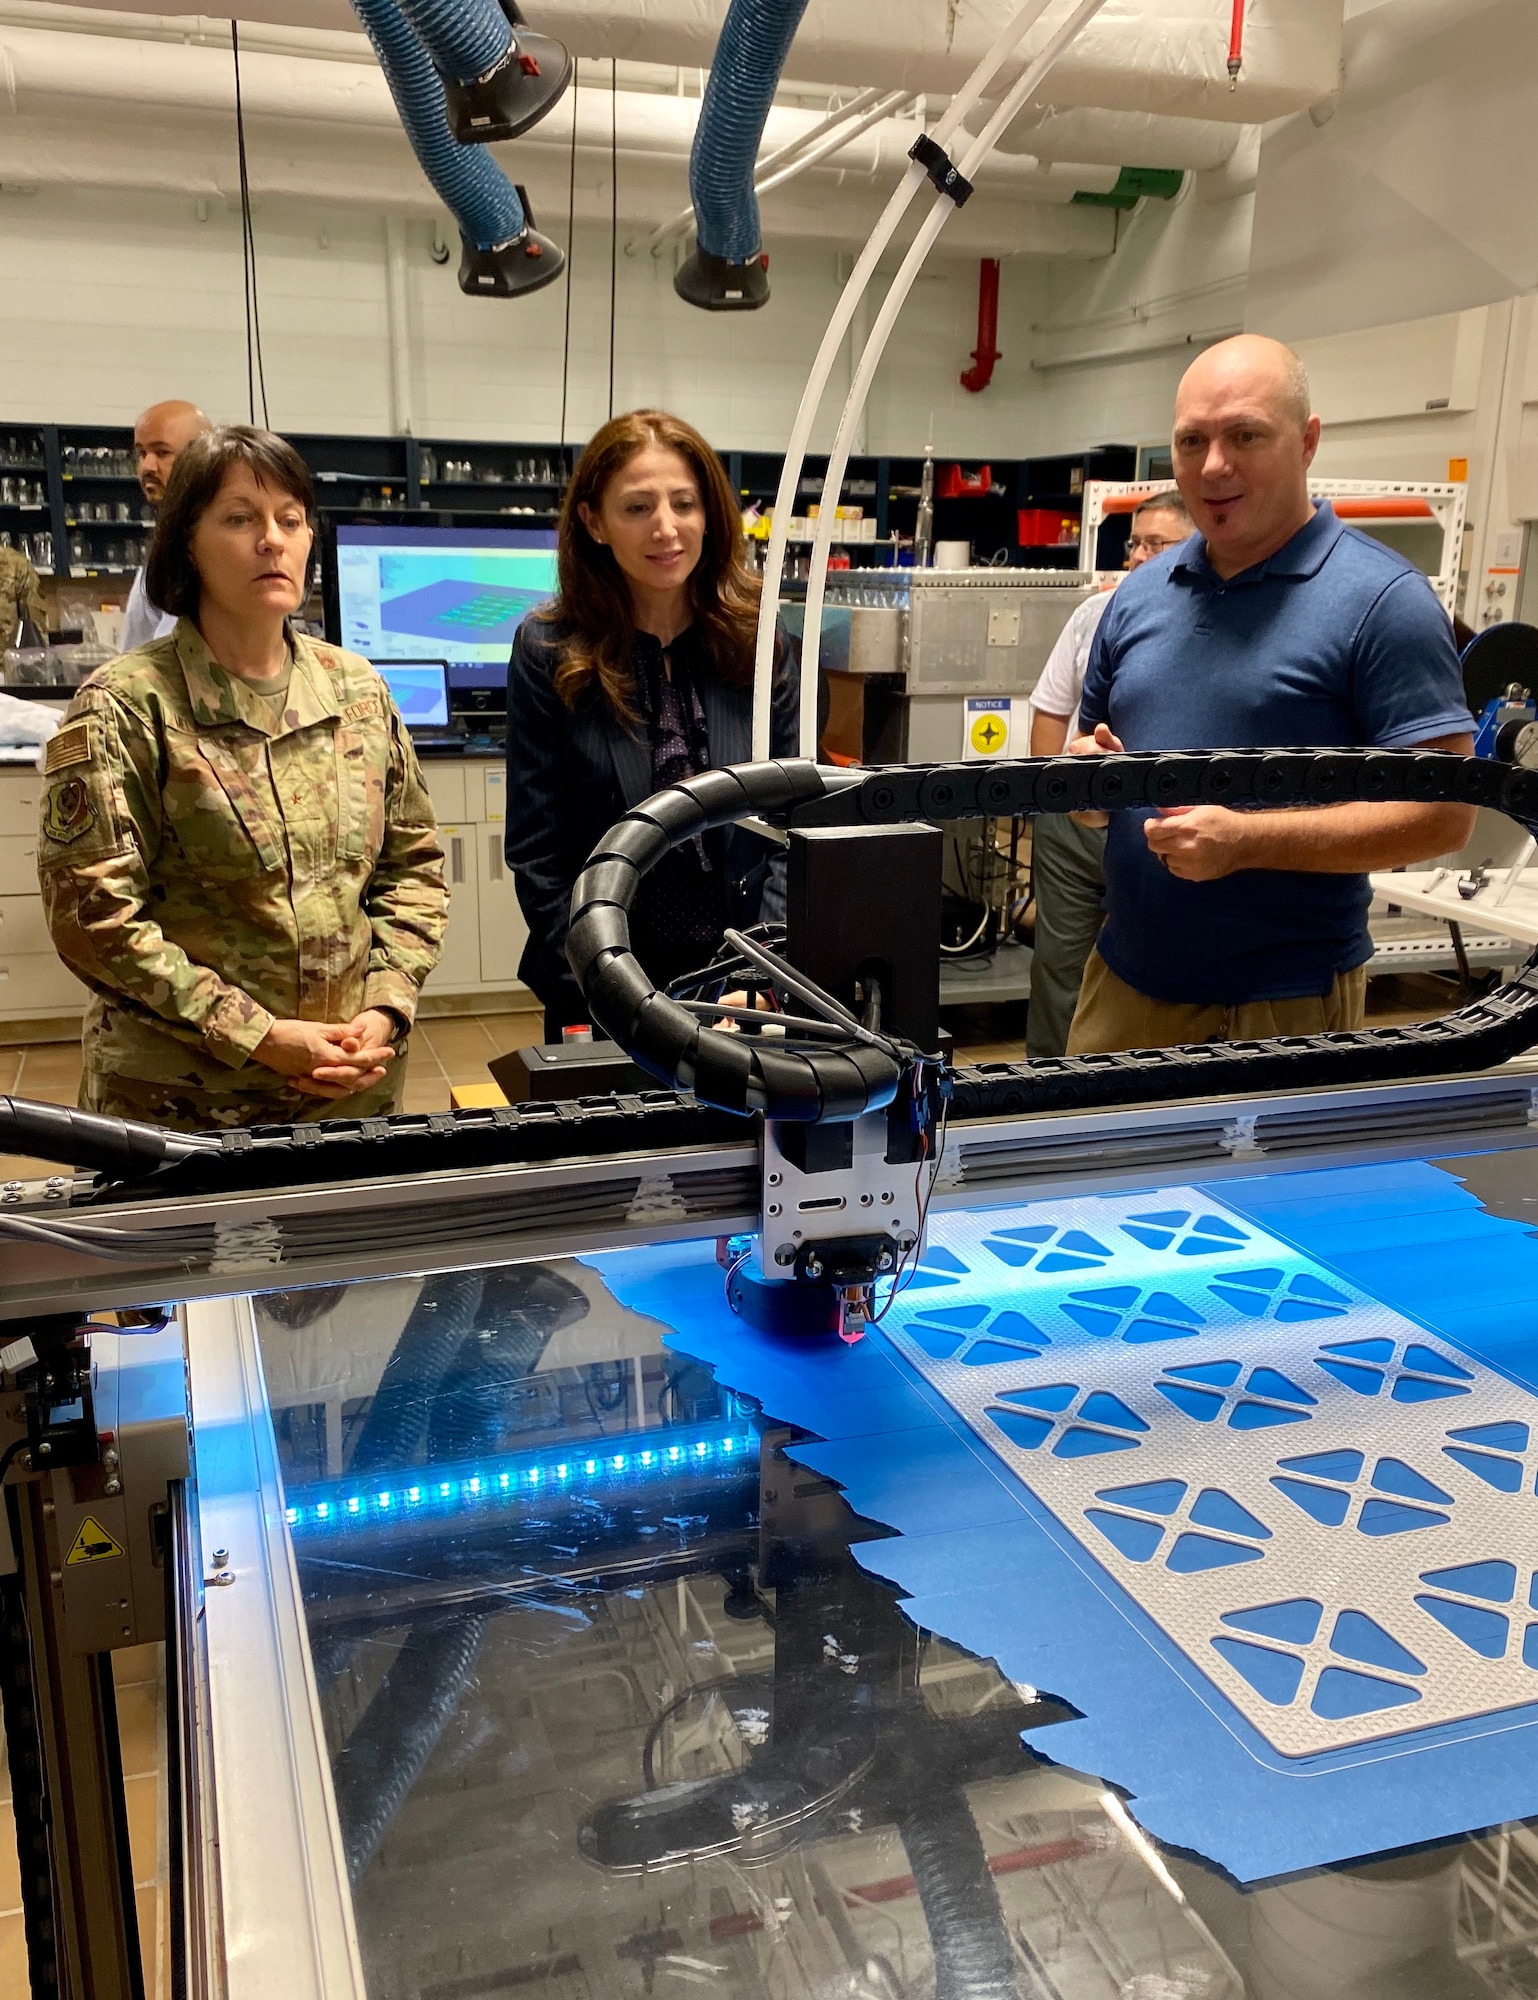 From left to right, Brigadier Gen. Patrice Melancon, Tyndall Program Management Office executive director, Dr. Julia Nesheiwat, Florida Chief Resilience Officer and Dr. Jeff Owens, Air Force Civil Engineer research scientist, observe a 3D printer producing materials for testing during a visit to the AFCEC research lab.